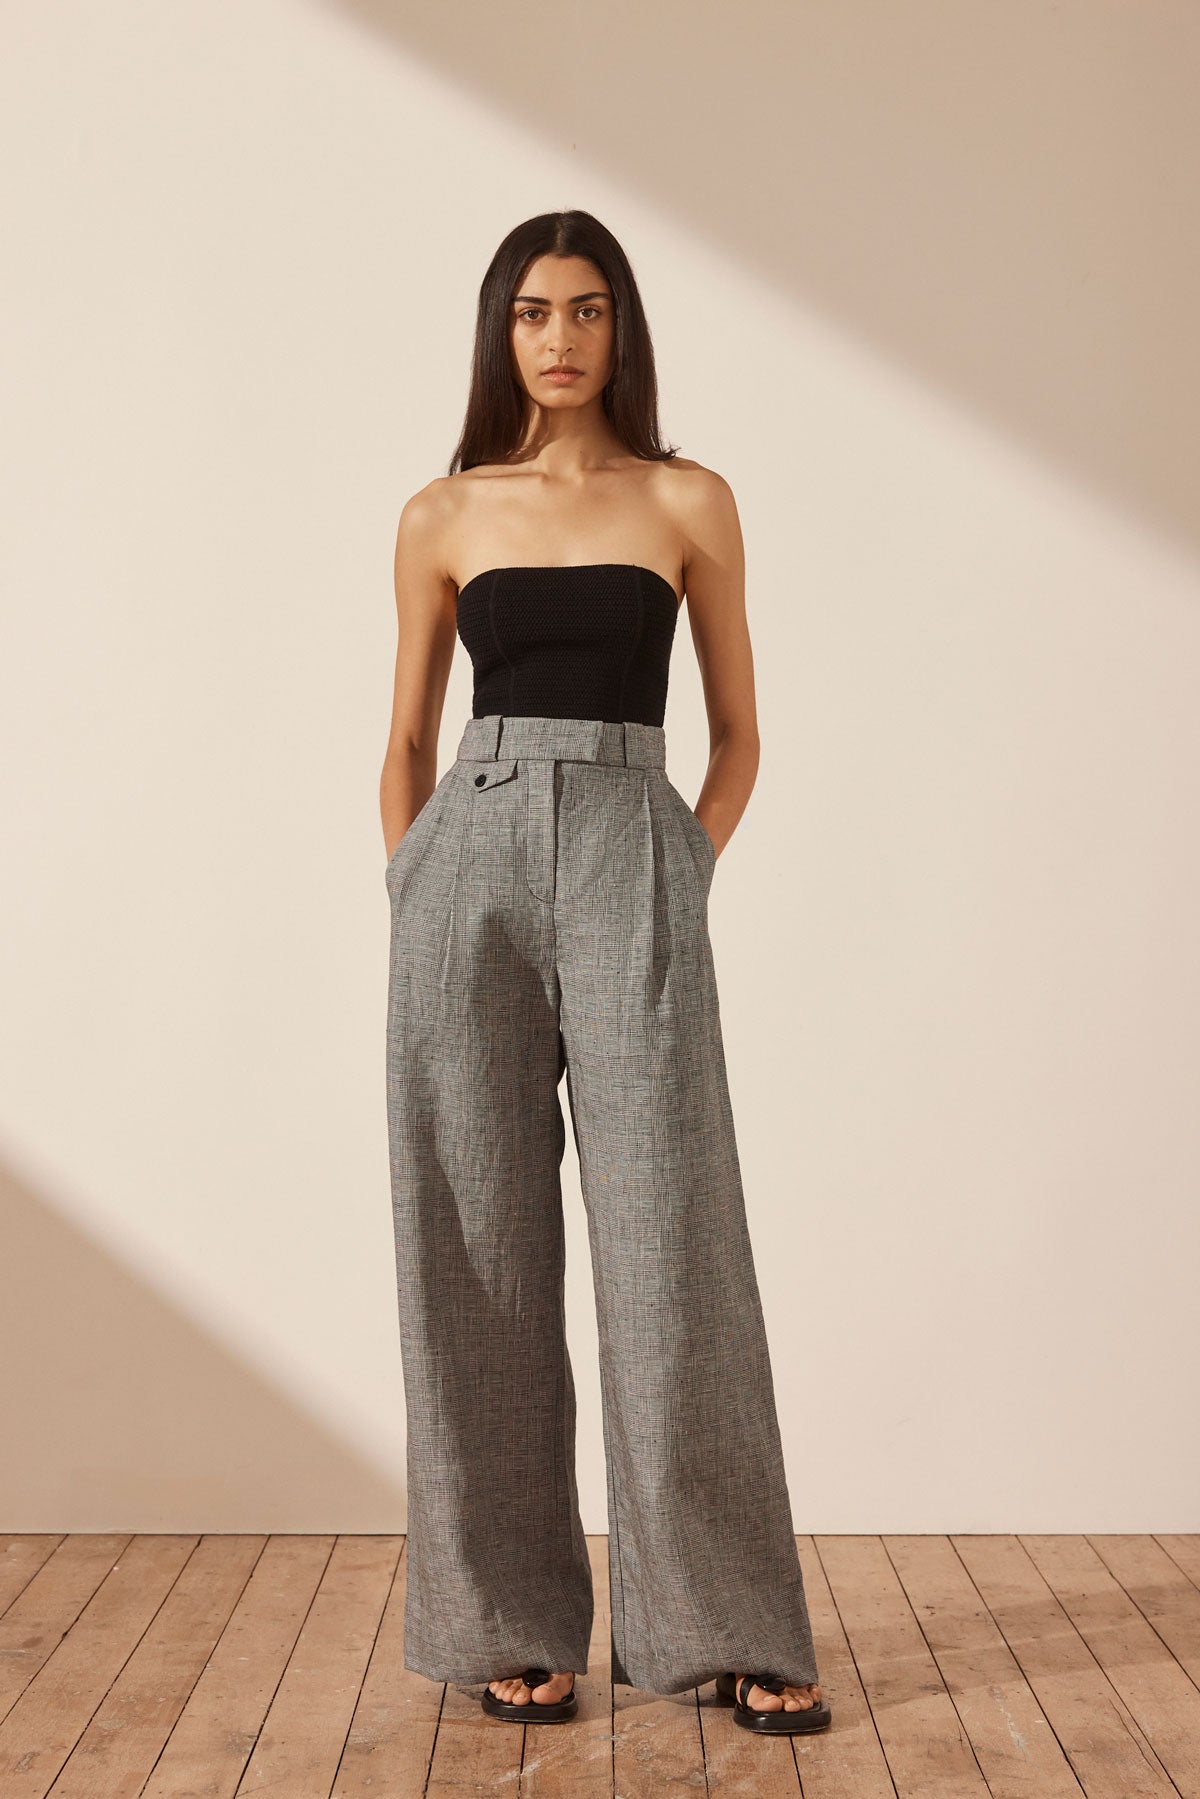 Off-White Button Detailed Wide Leg Ladies Pant – Modest Eve